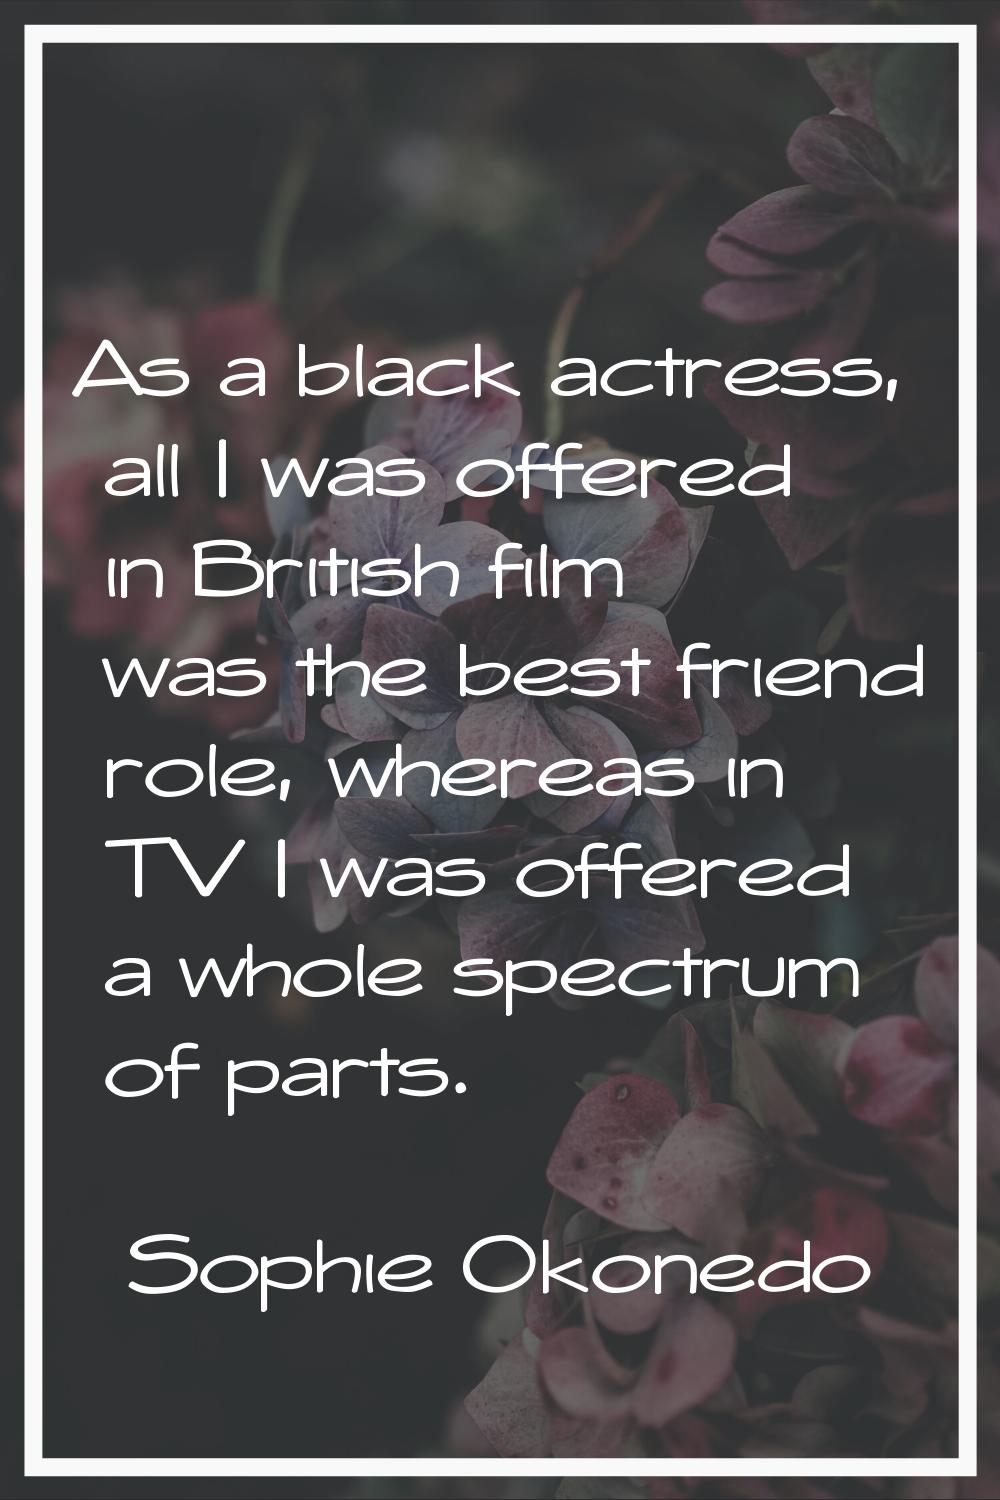 As a black actress, all I was offered in British film was the best friend role, whereas in TV I was